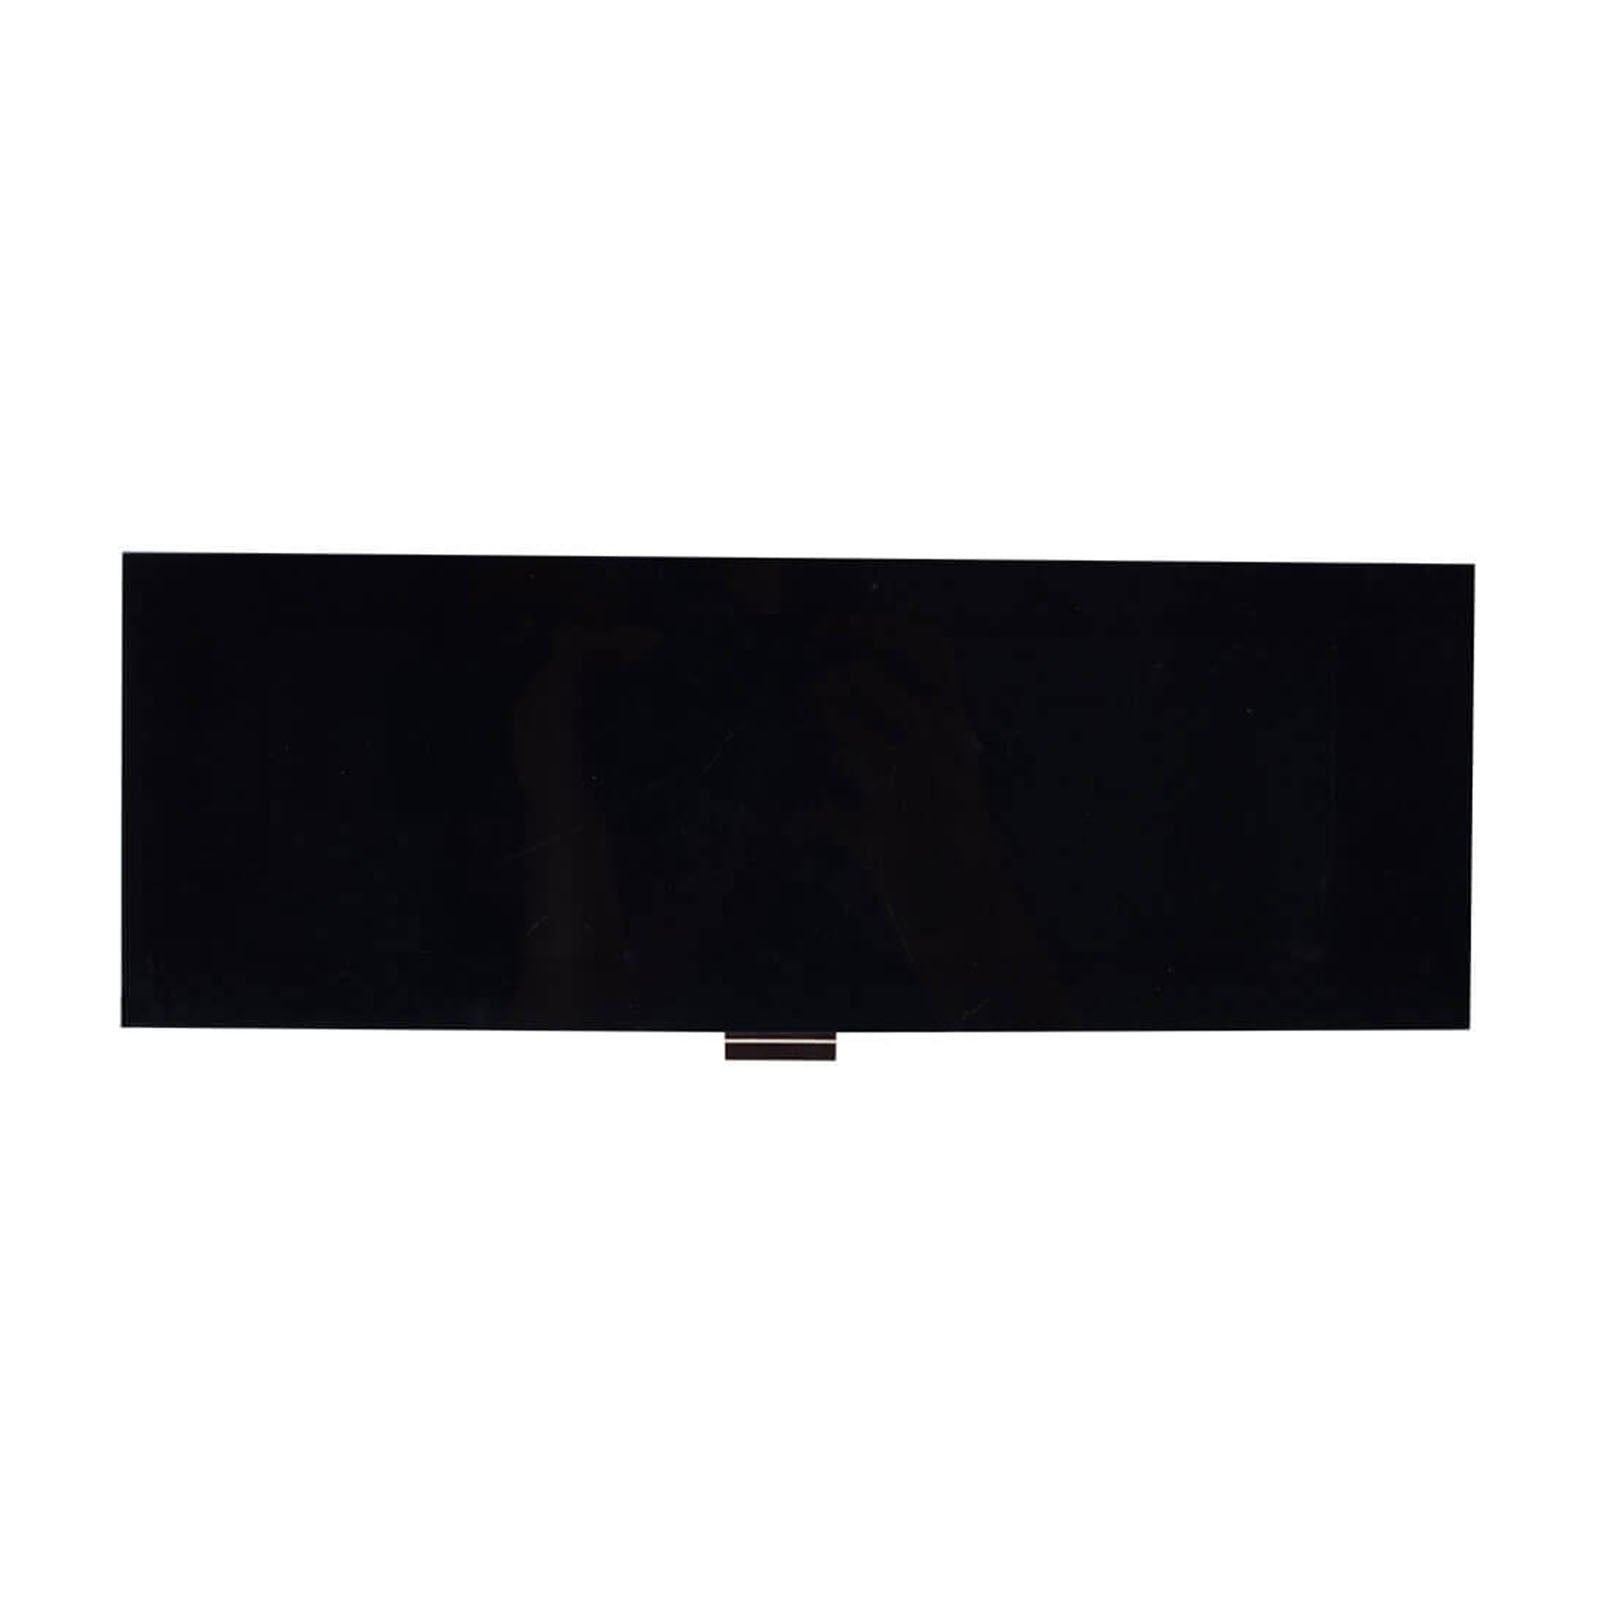 8.0-inch BAR type IPS display with 1600x480 resolution, capacitive touch, and LVDS connection